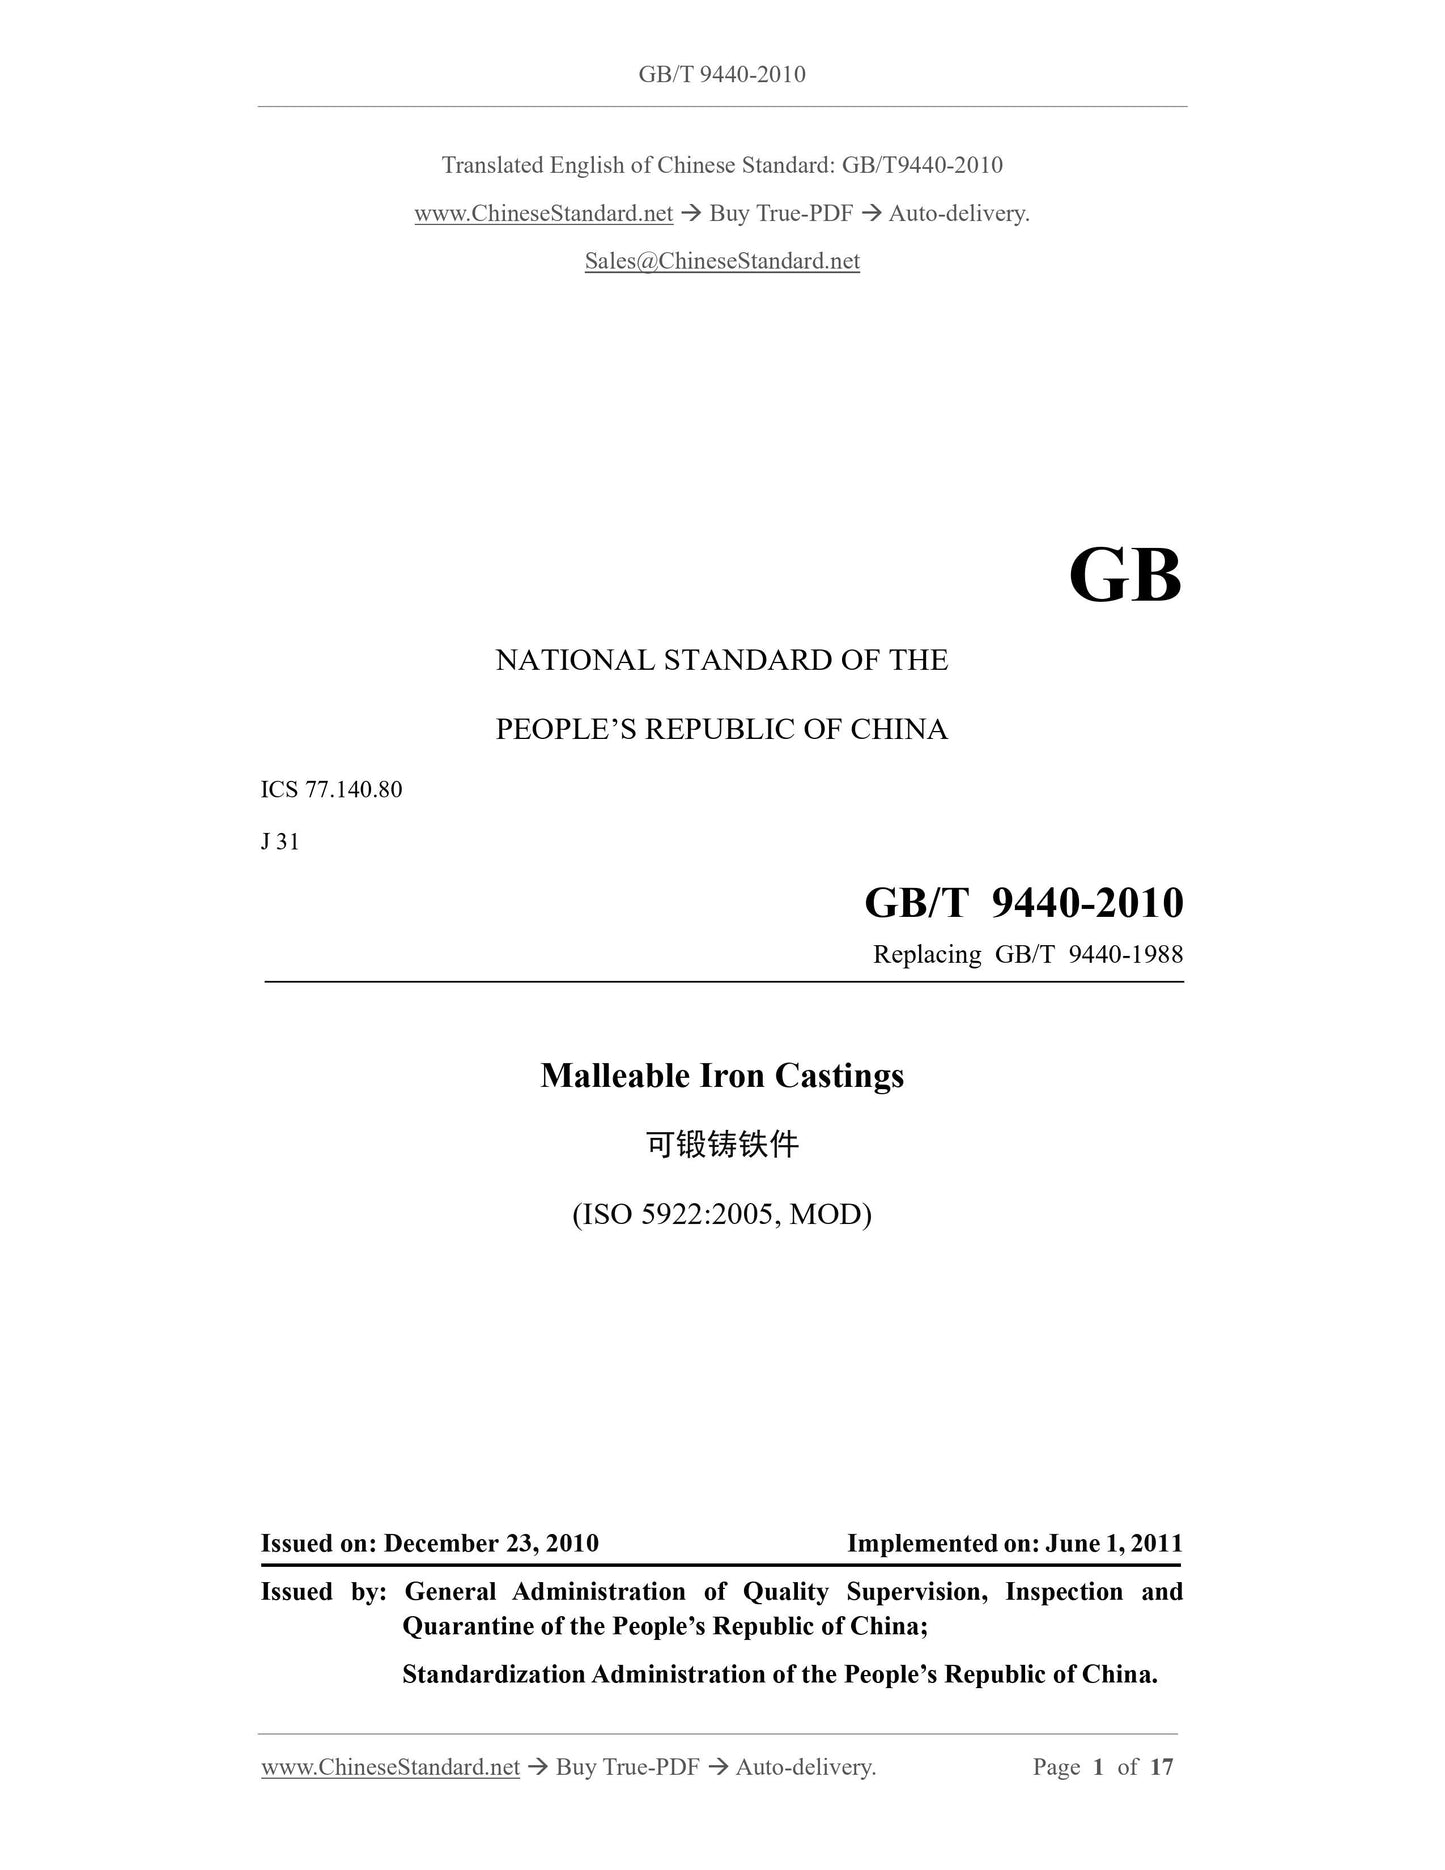 GB/T 9440-2010 Page 1